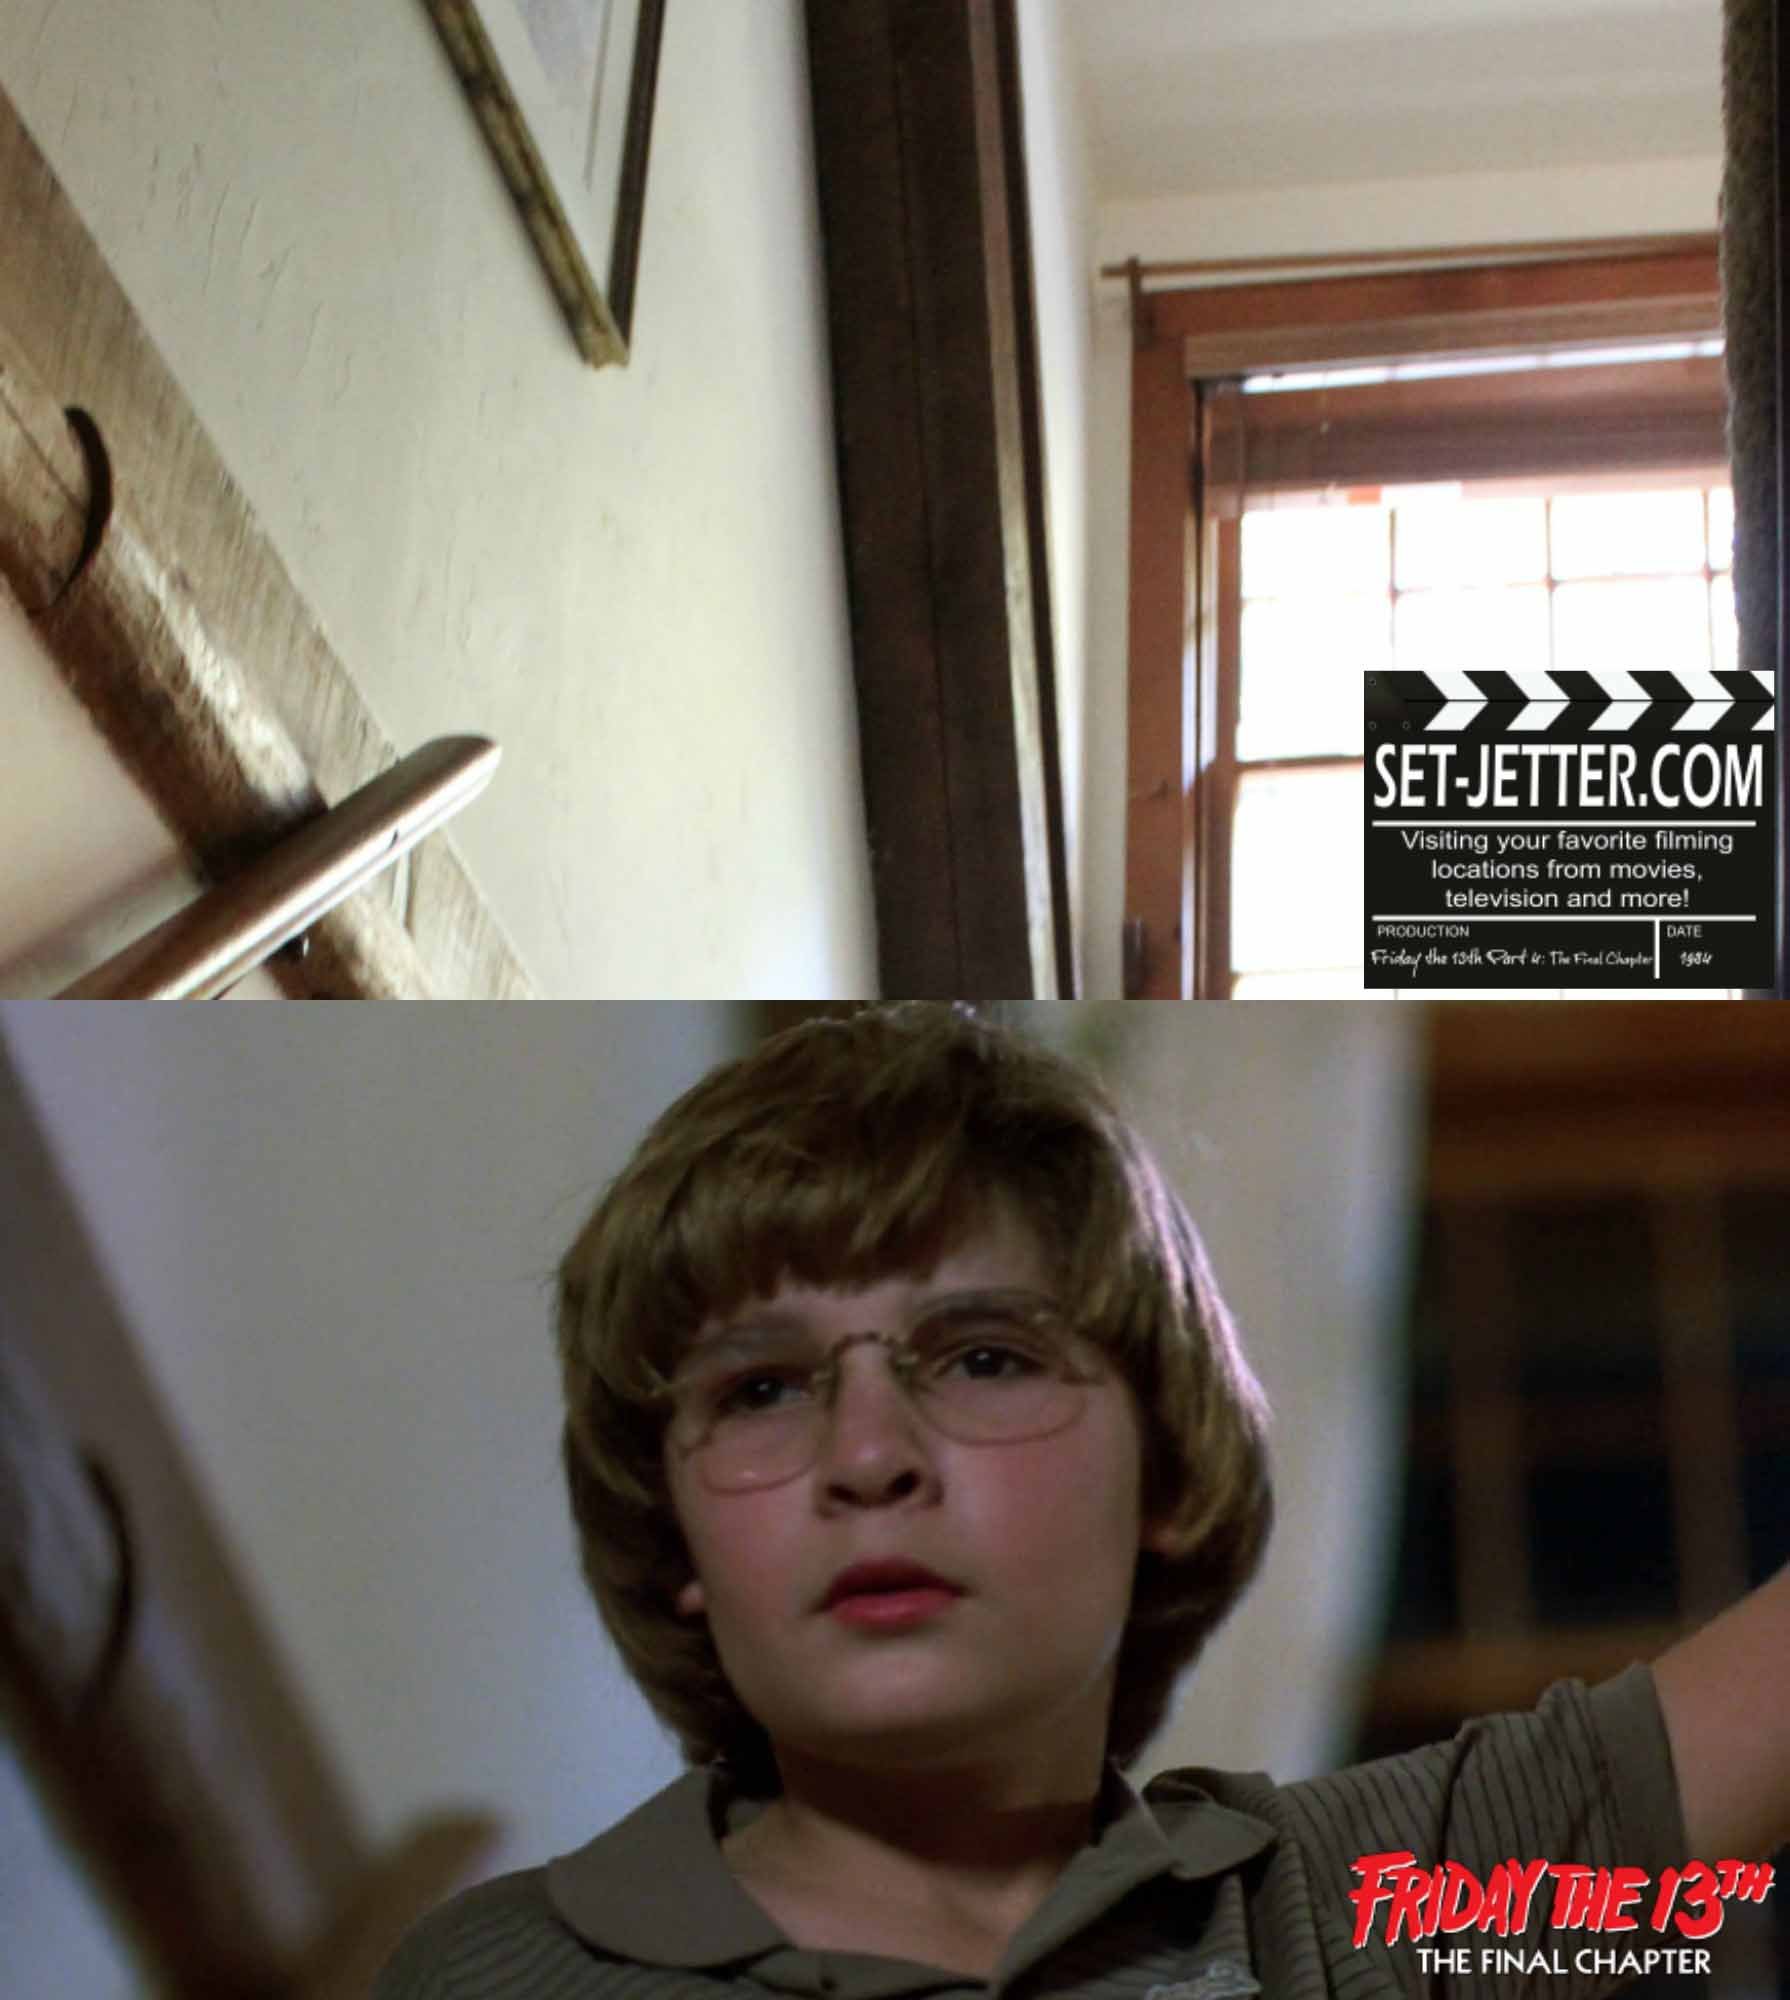 Friday the 13th The Final Chapter comparison 158.jpg